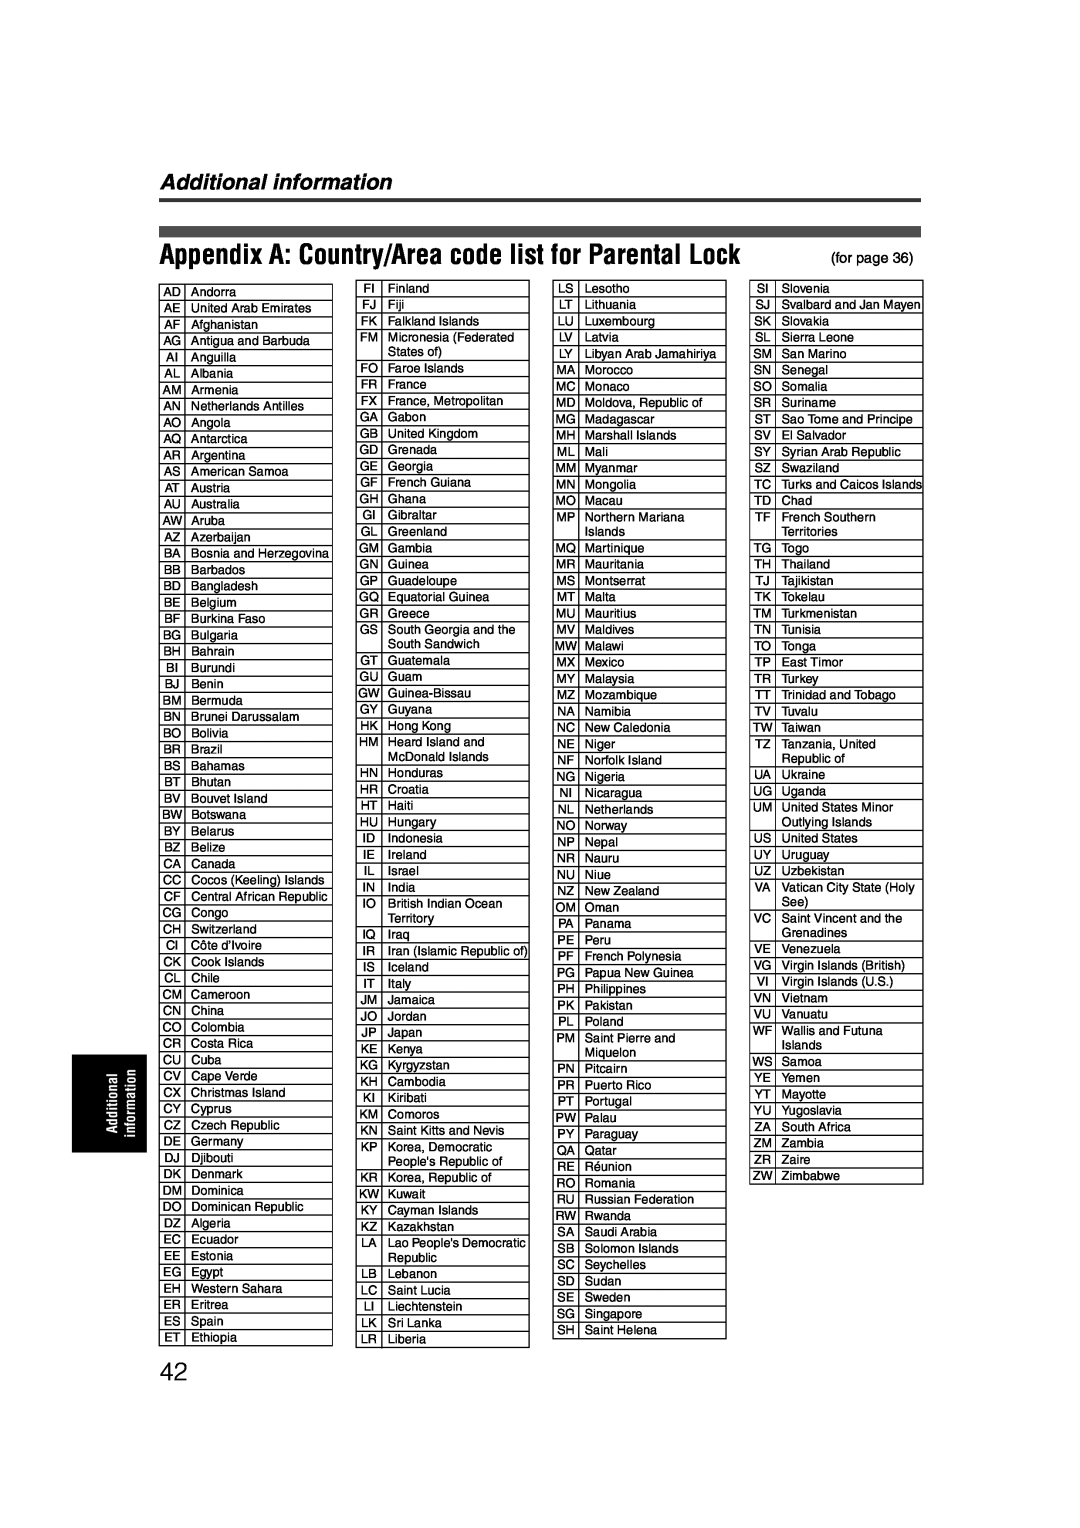 JVC LET0227-003A manual Appendix A Country/Area code list for Parental Lock, Additional information, for page 